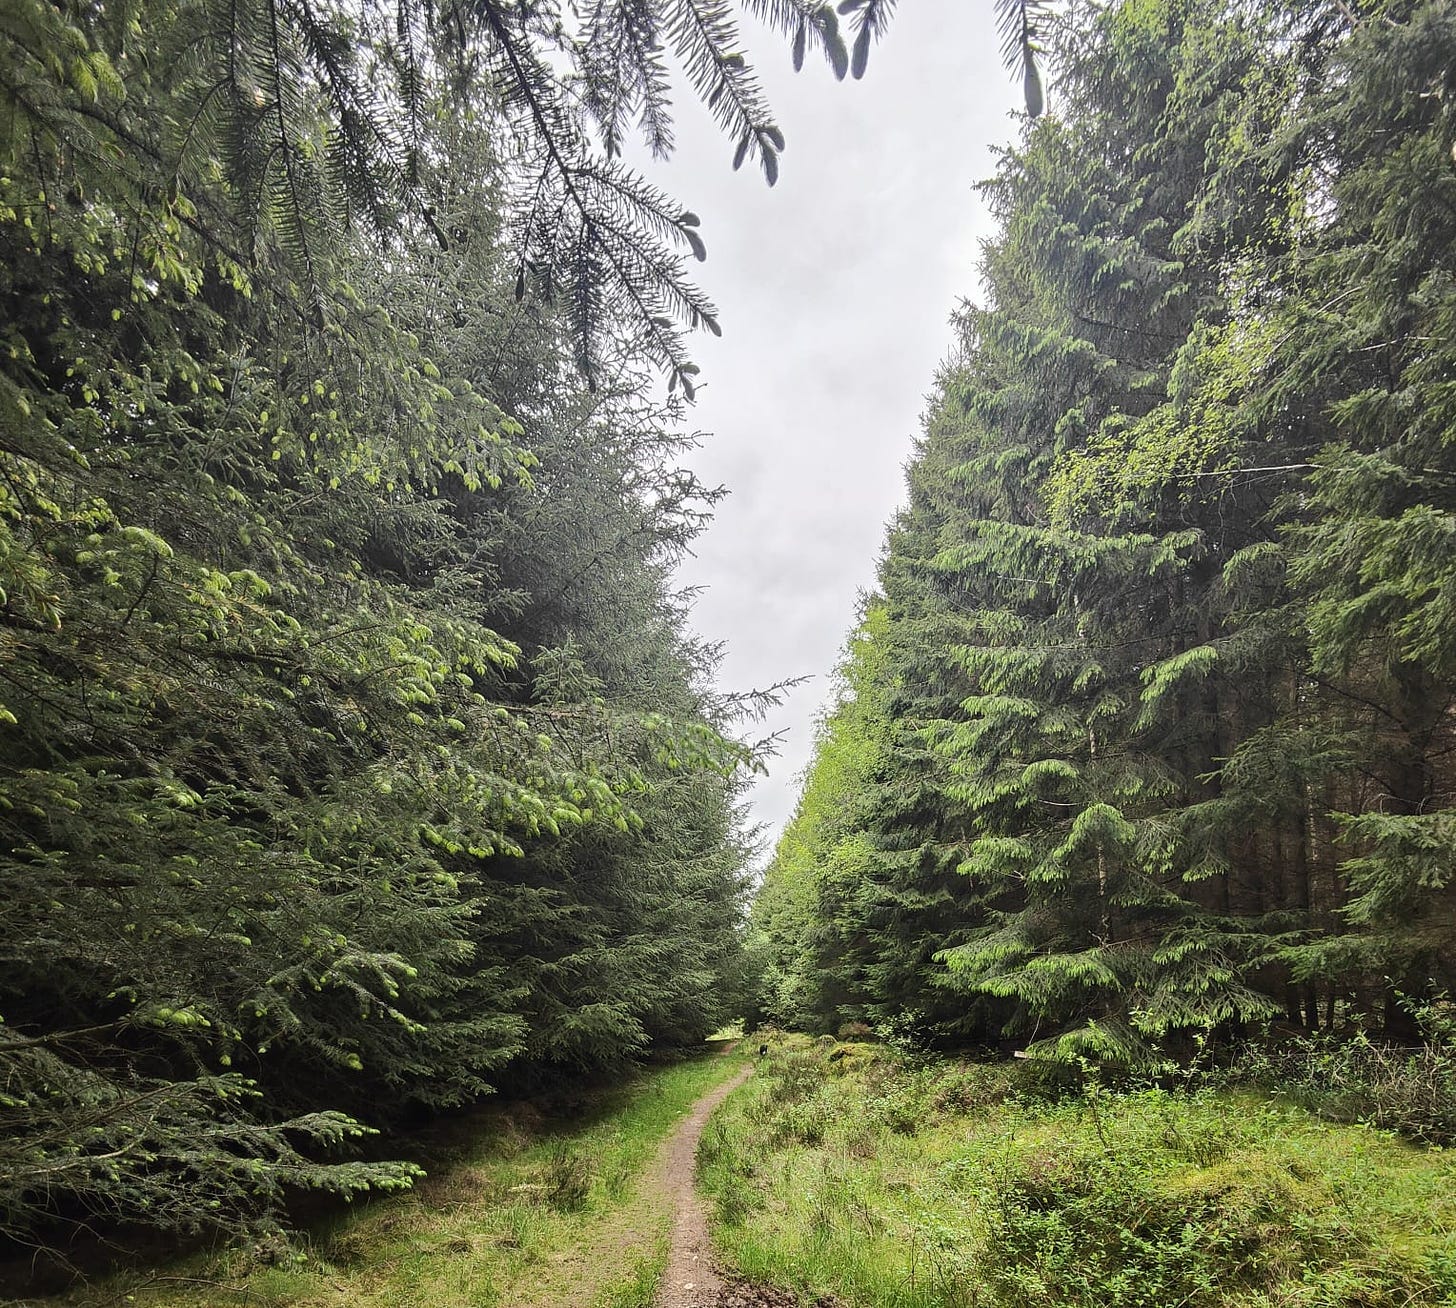 Colour photo showing a path between the pine trees in the forest area outside Scone in Scotland